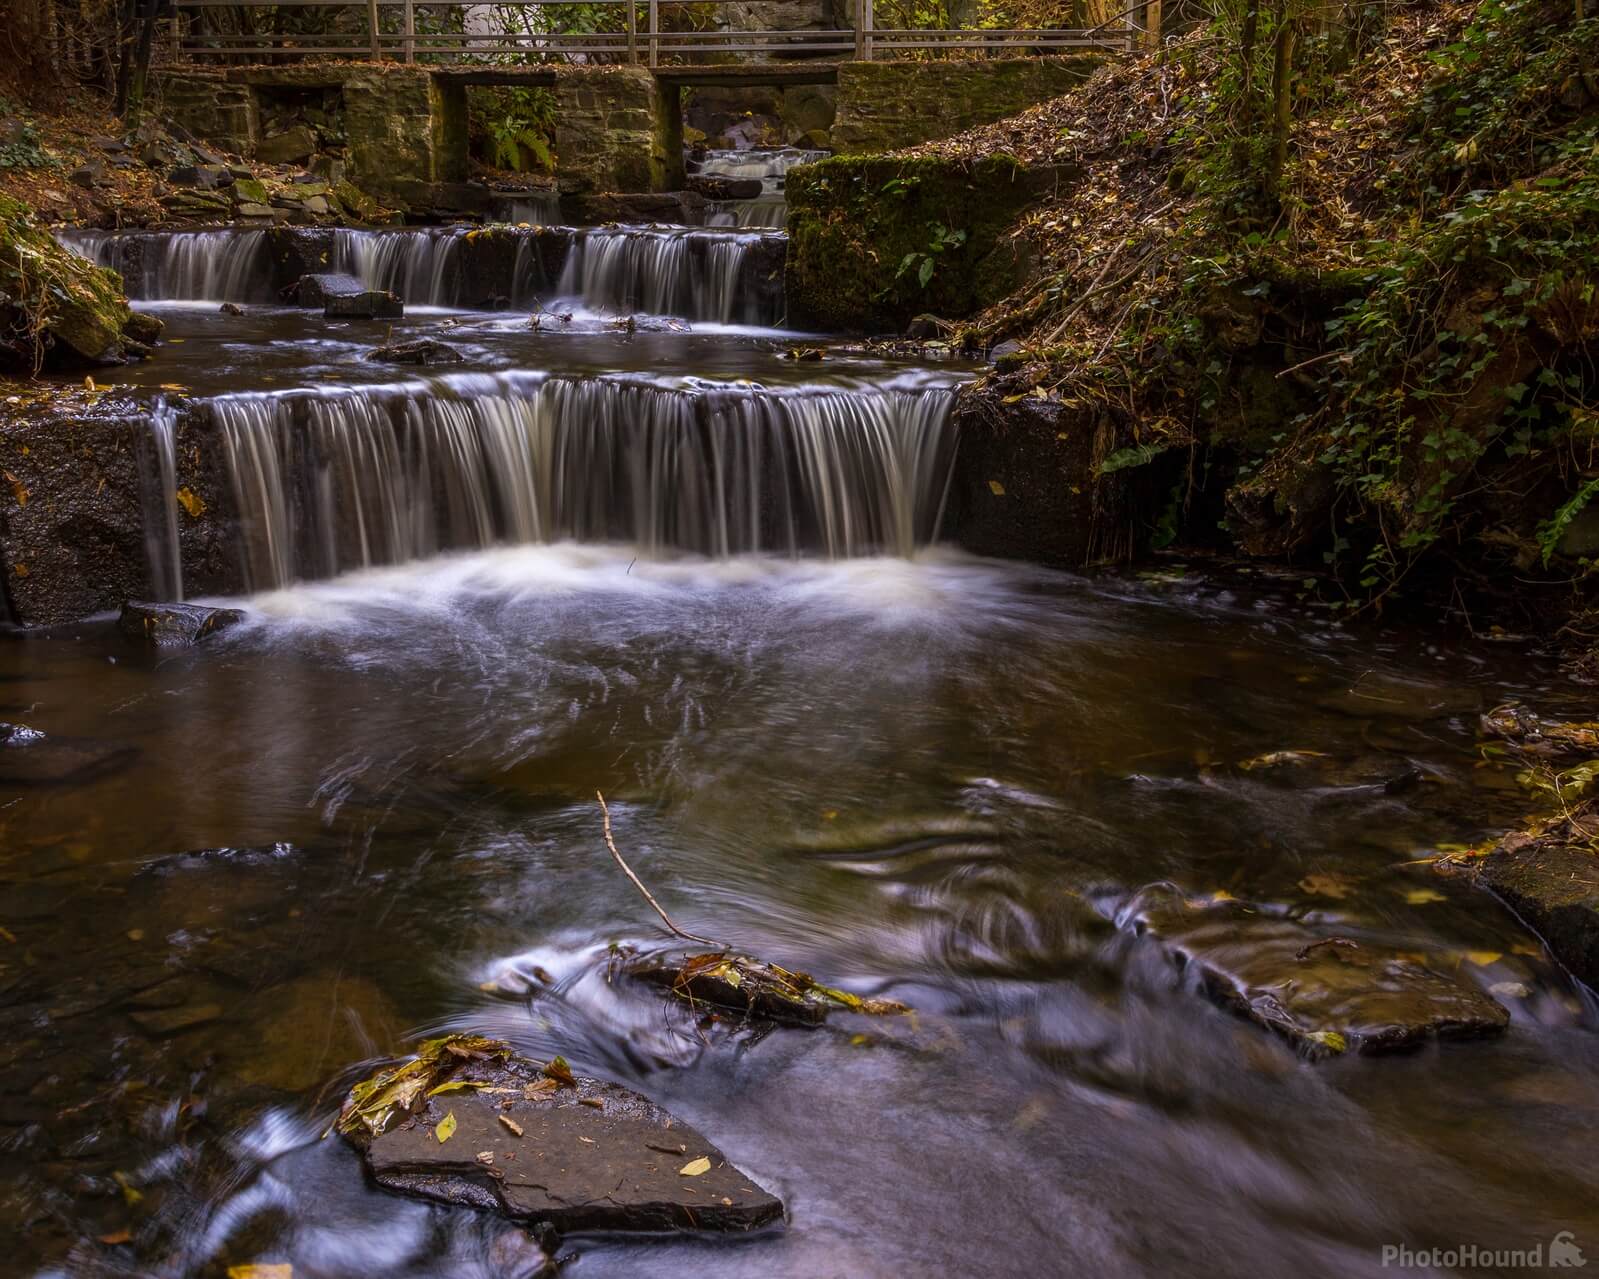 Image of Harmby Waterfall by Andy Killingbeck